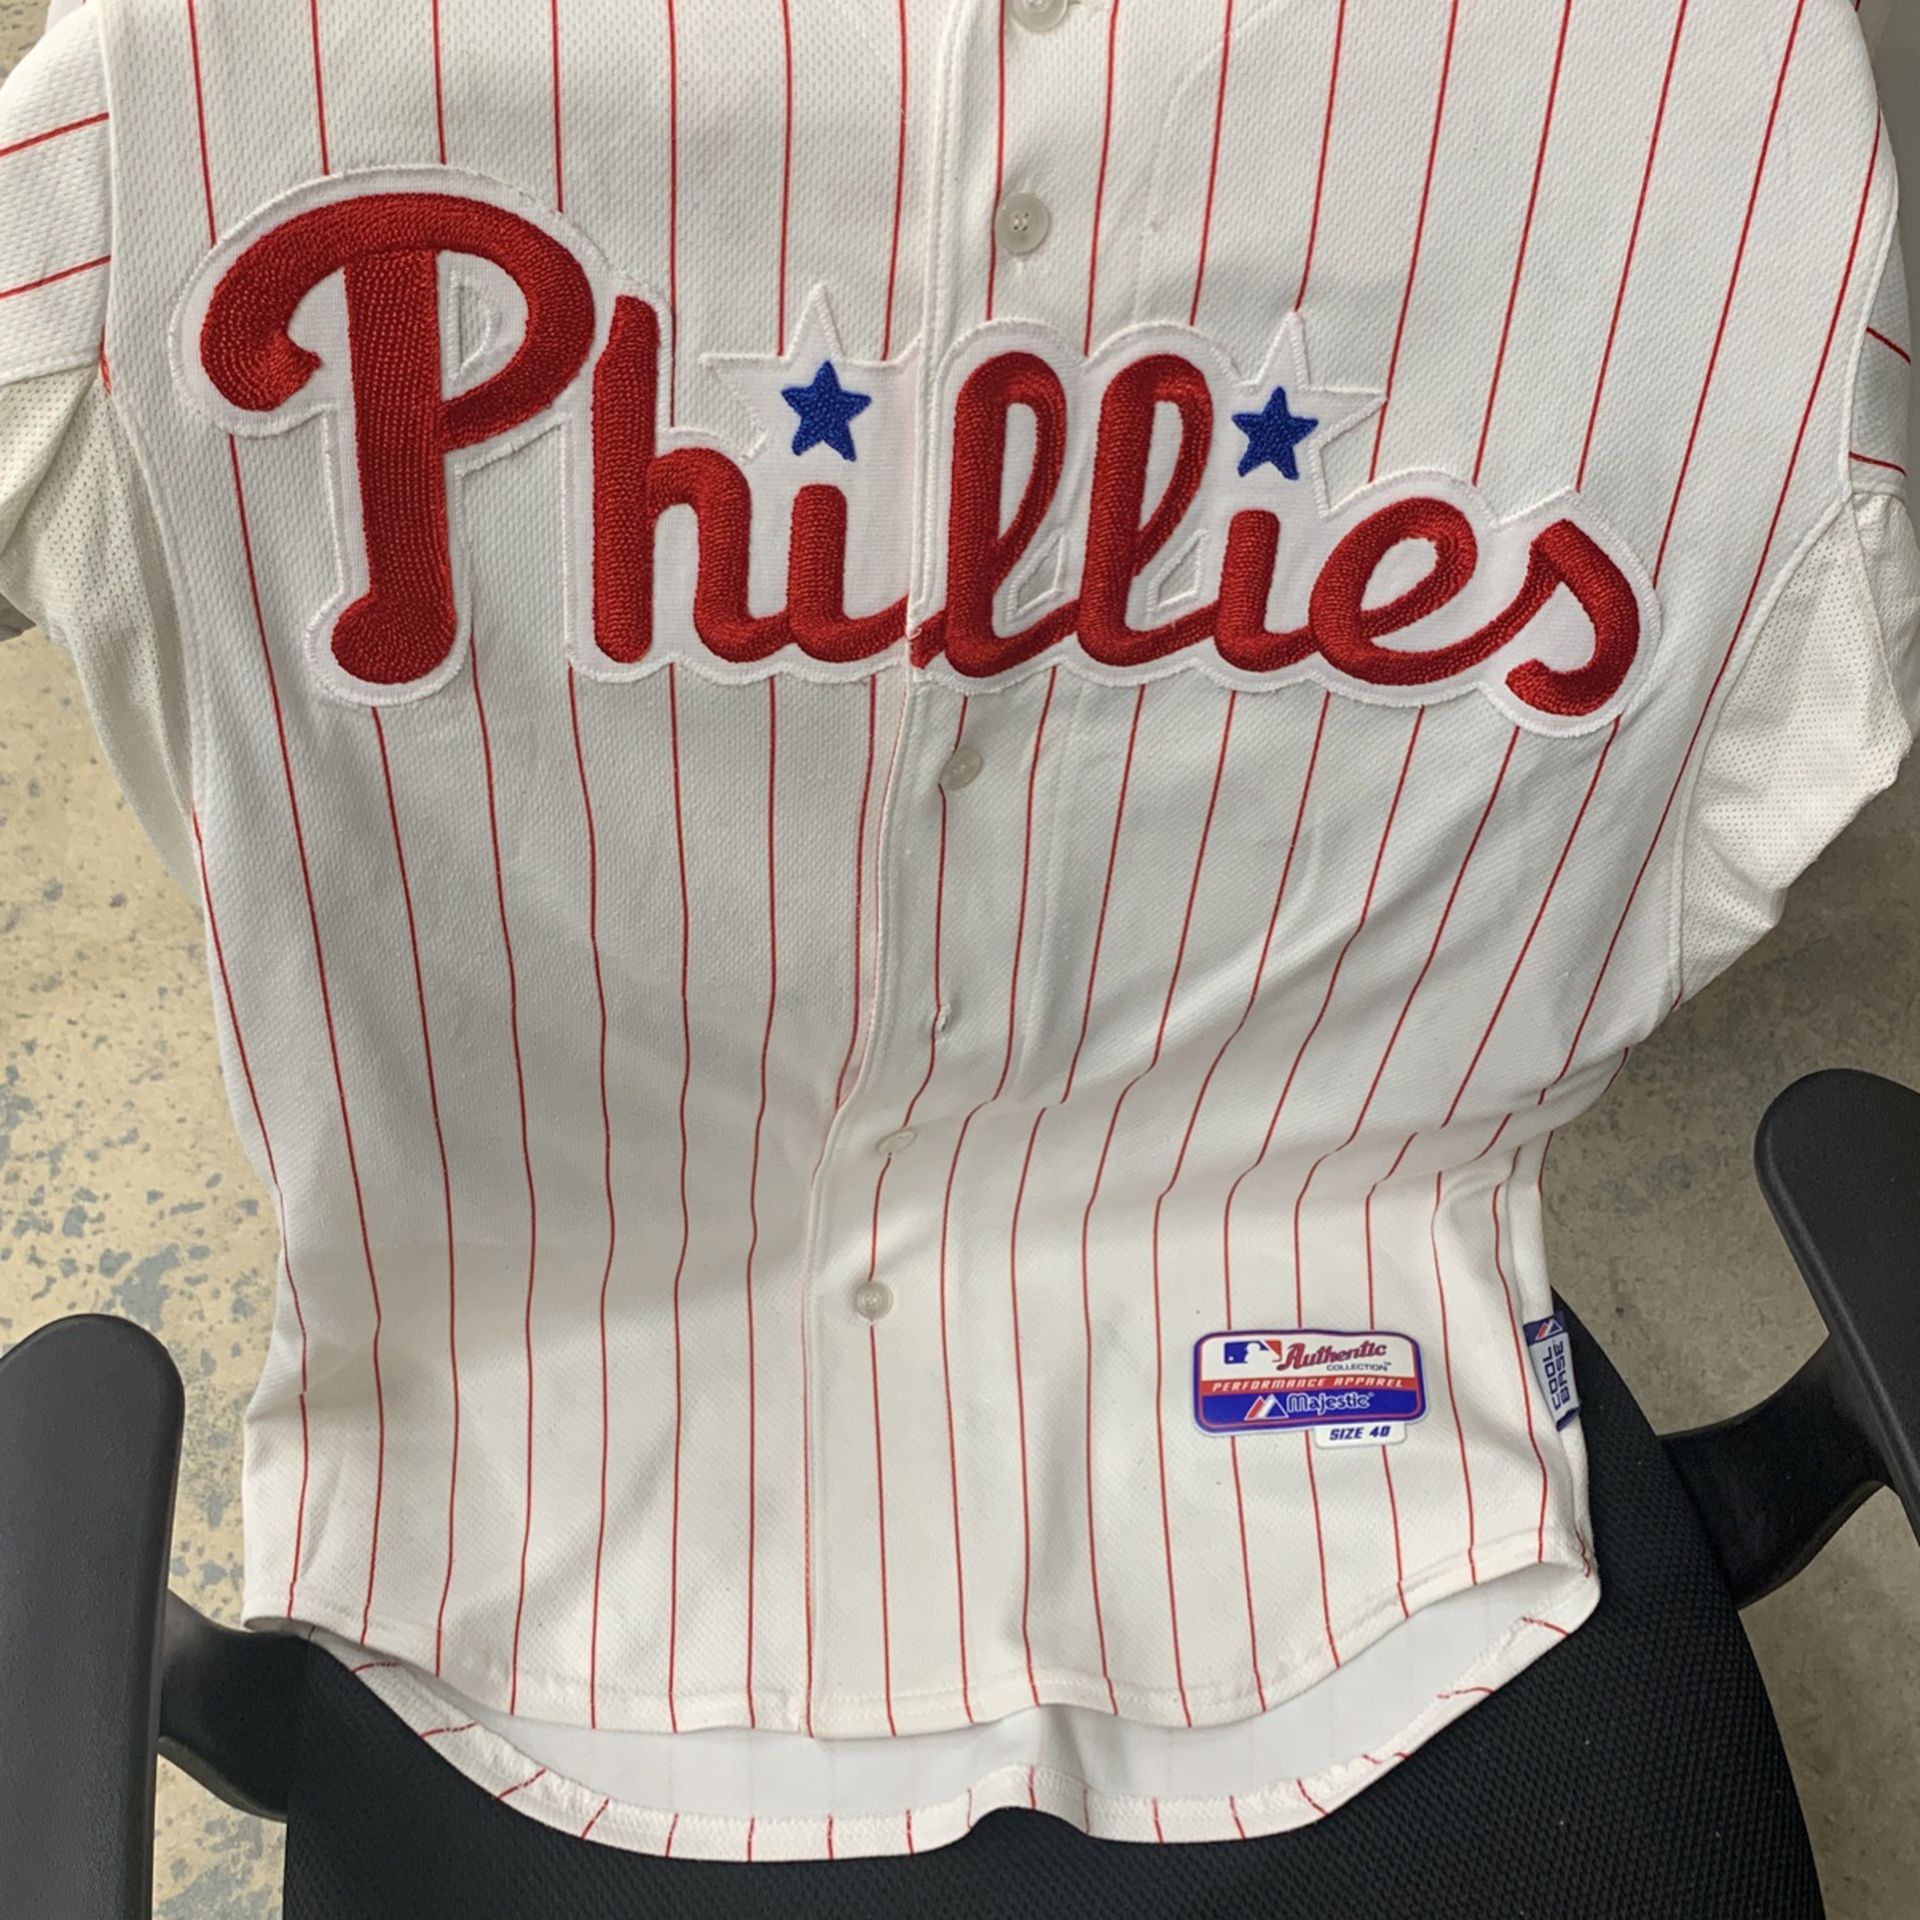 Phillies Chase Utley Jersey